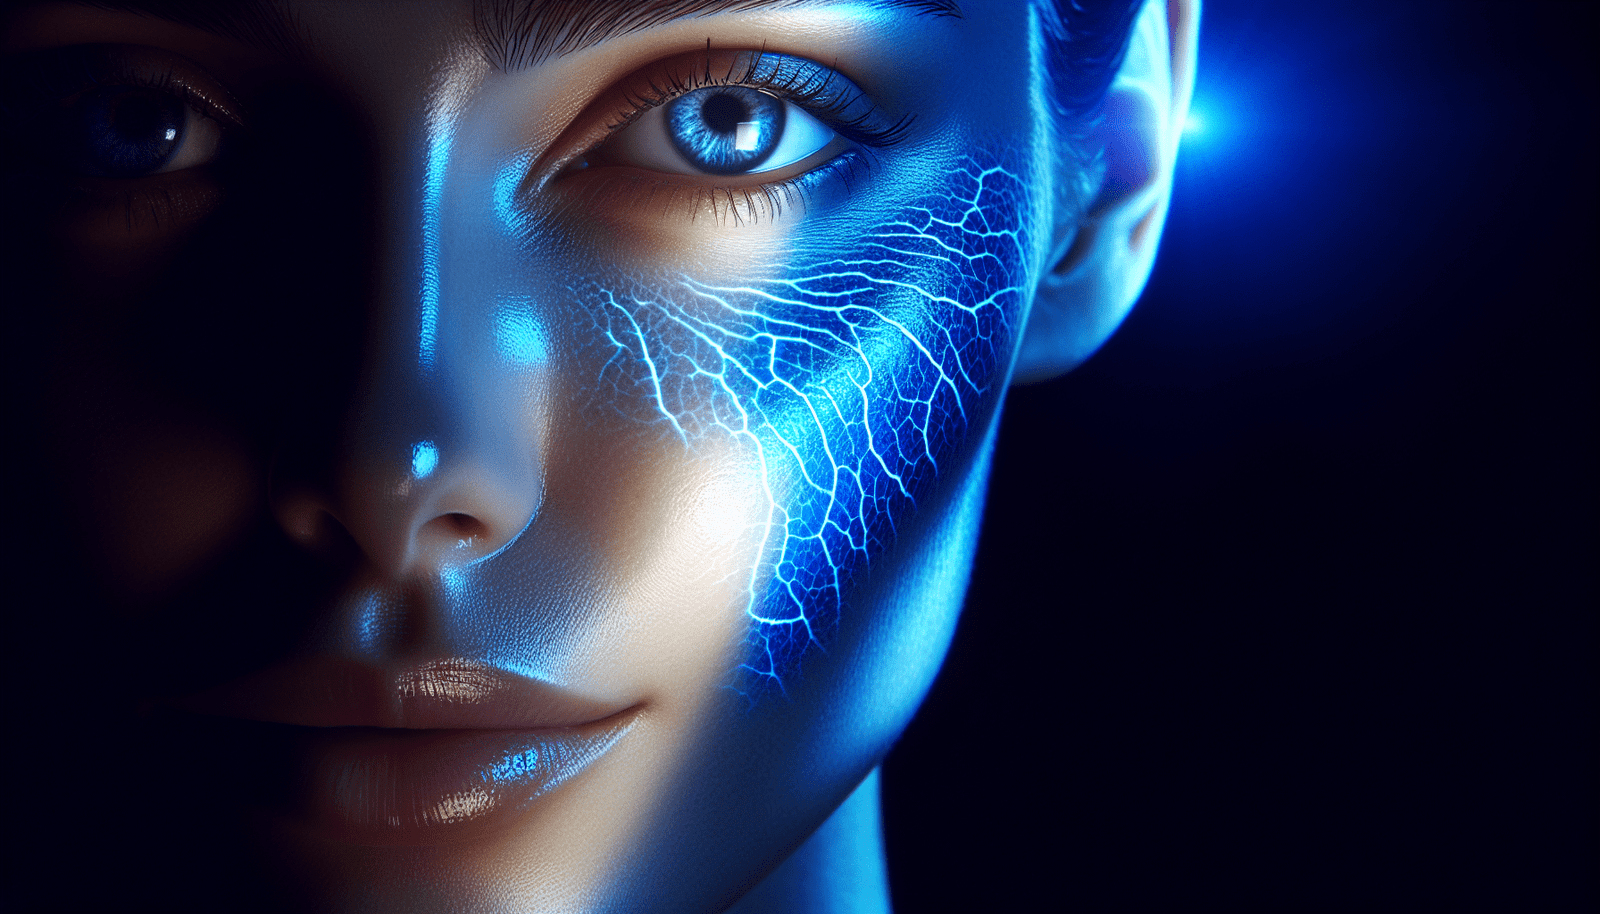 What Are The Effects Of Blue Light From Screens On Skin Aging?